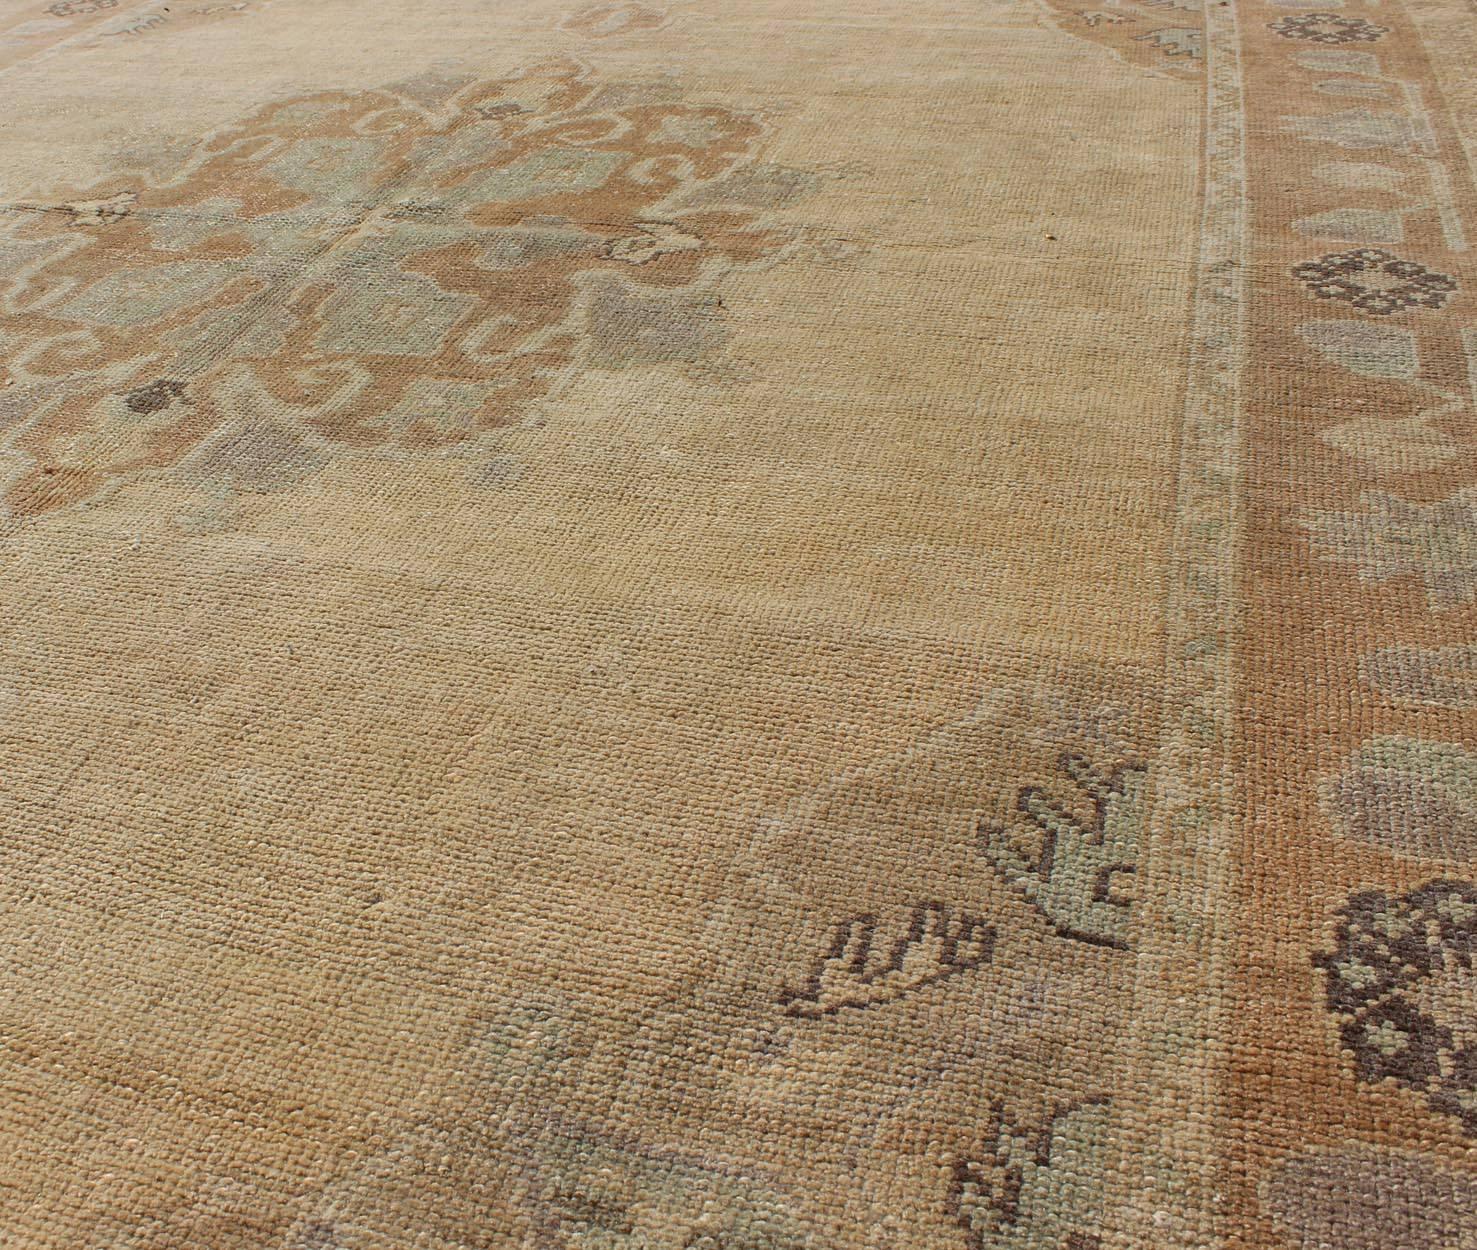 20th Century Turkish Oushak Vintage Rug with Floral Medallion in Beige an Seladon Green